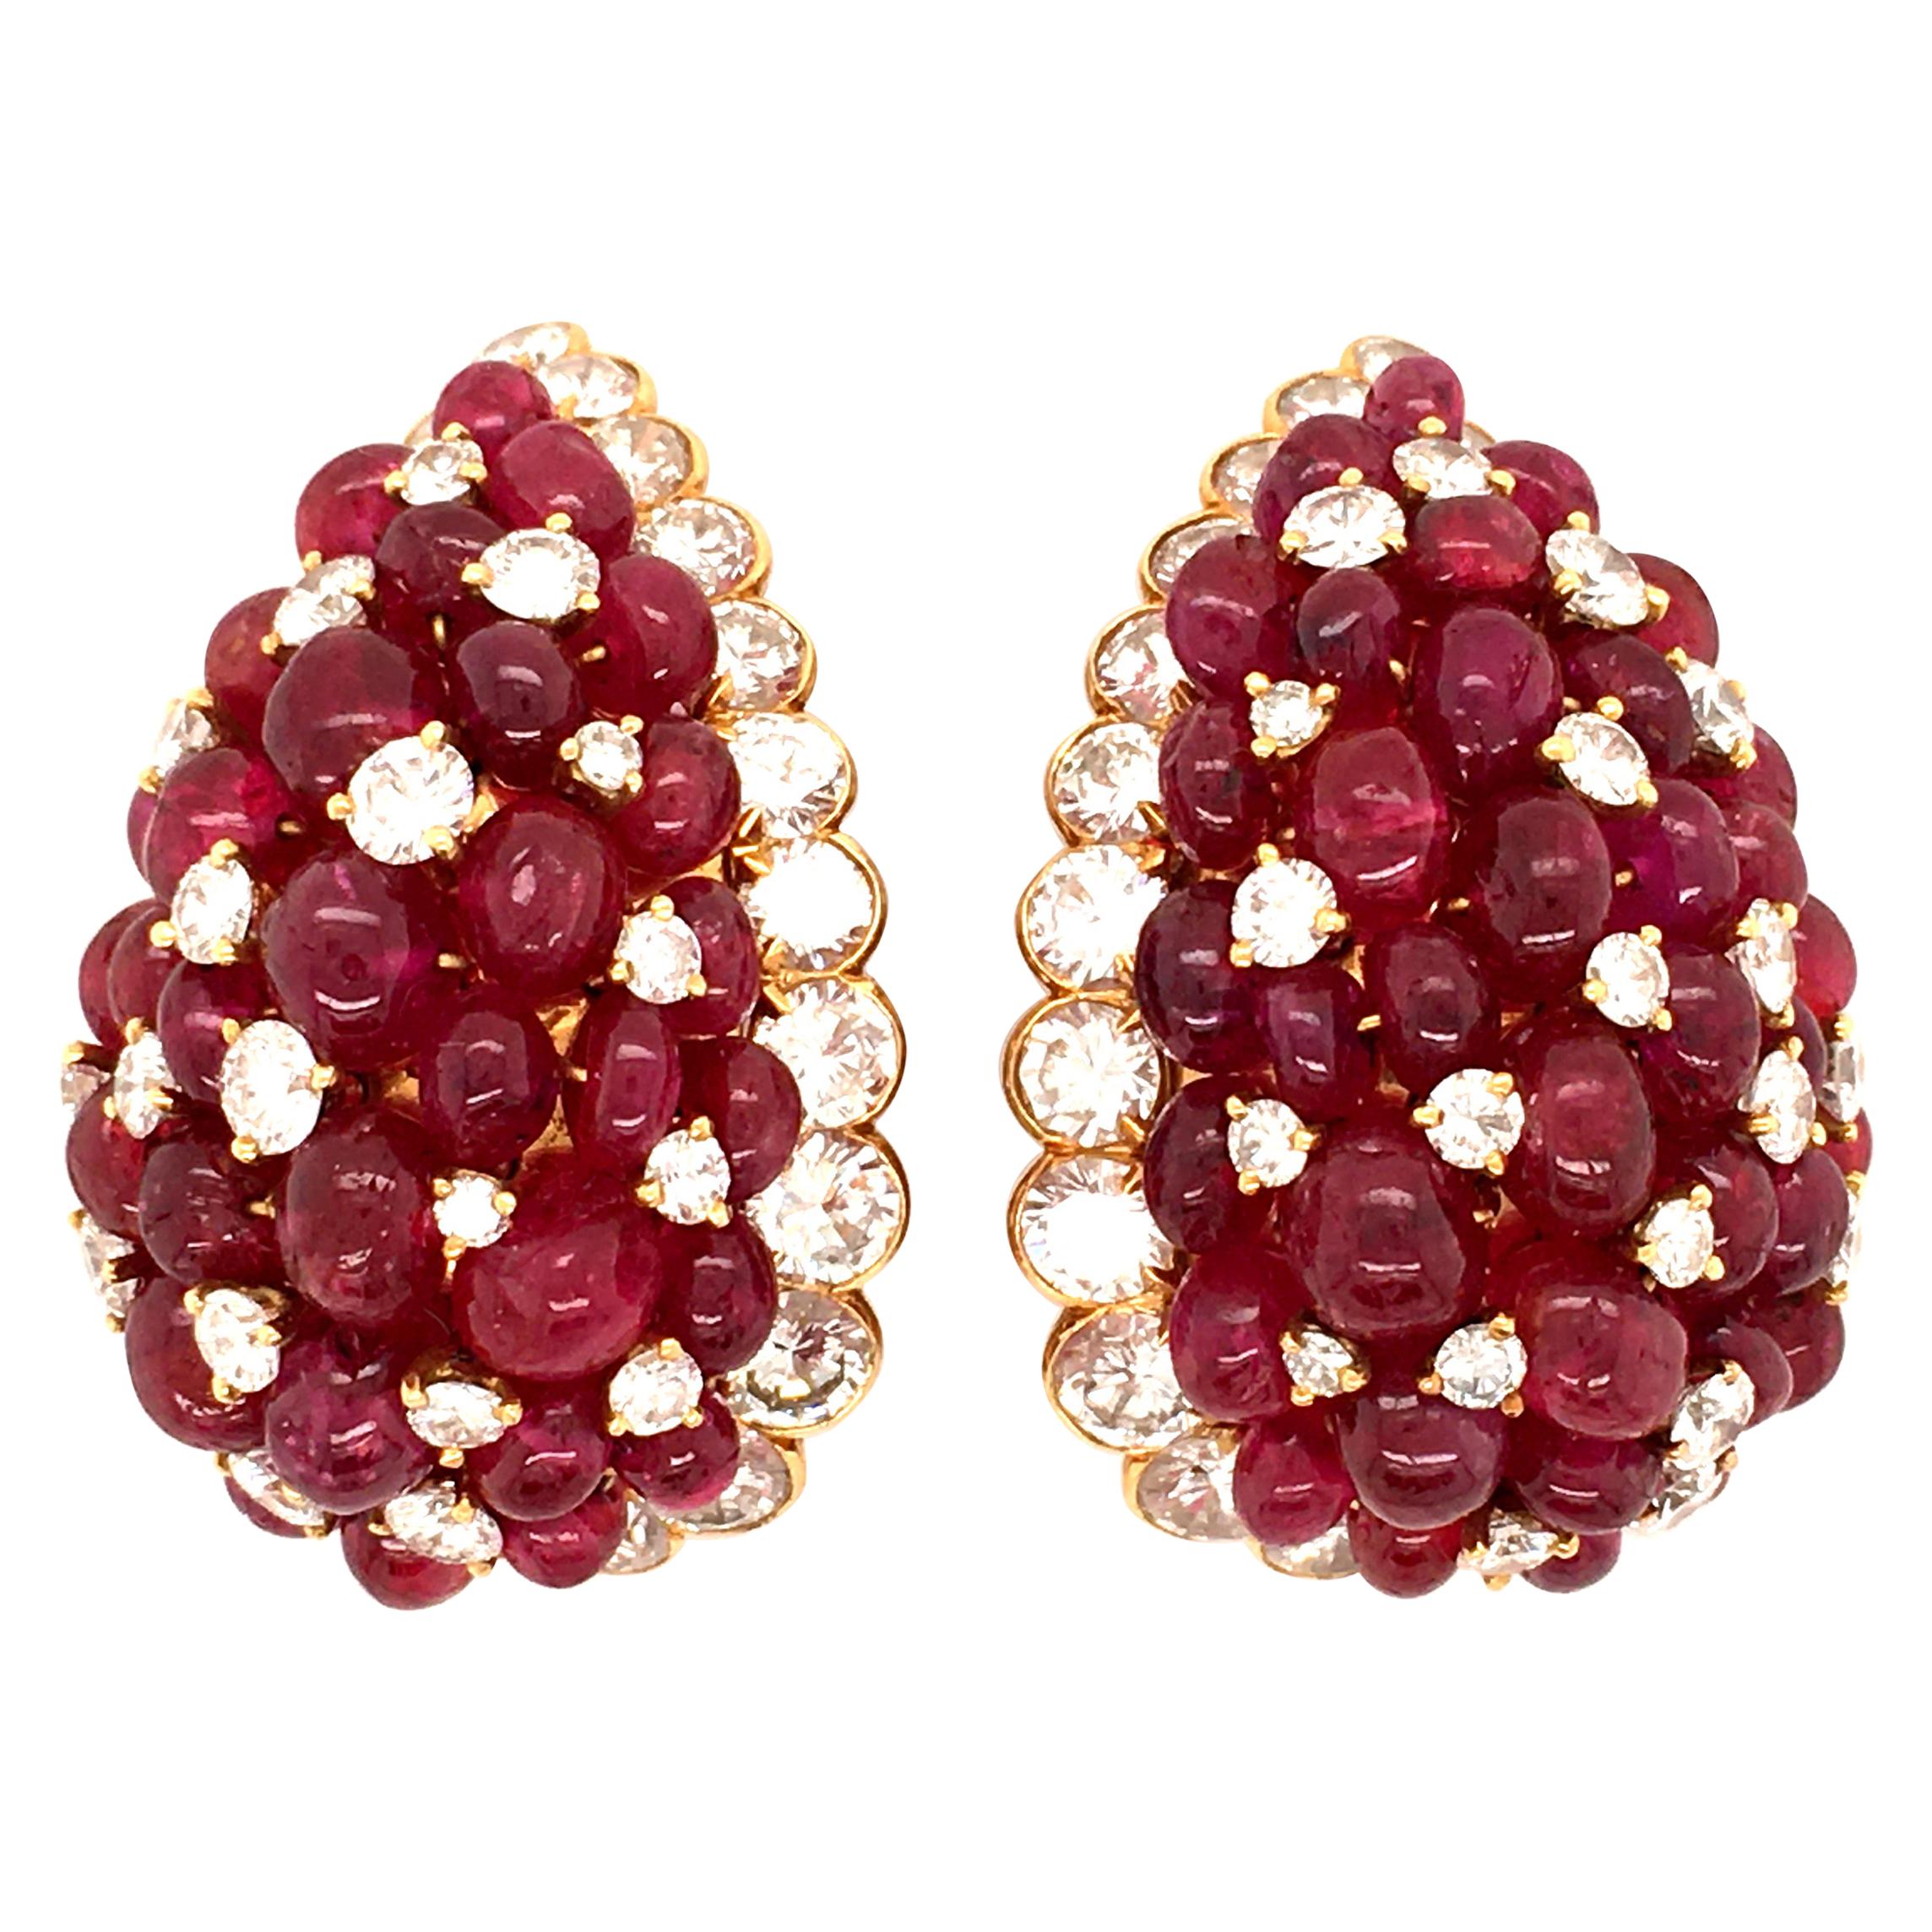 Van Cleef & Arpels Ruby and Diamond Ear Clips in Yellow Gold 750